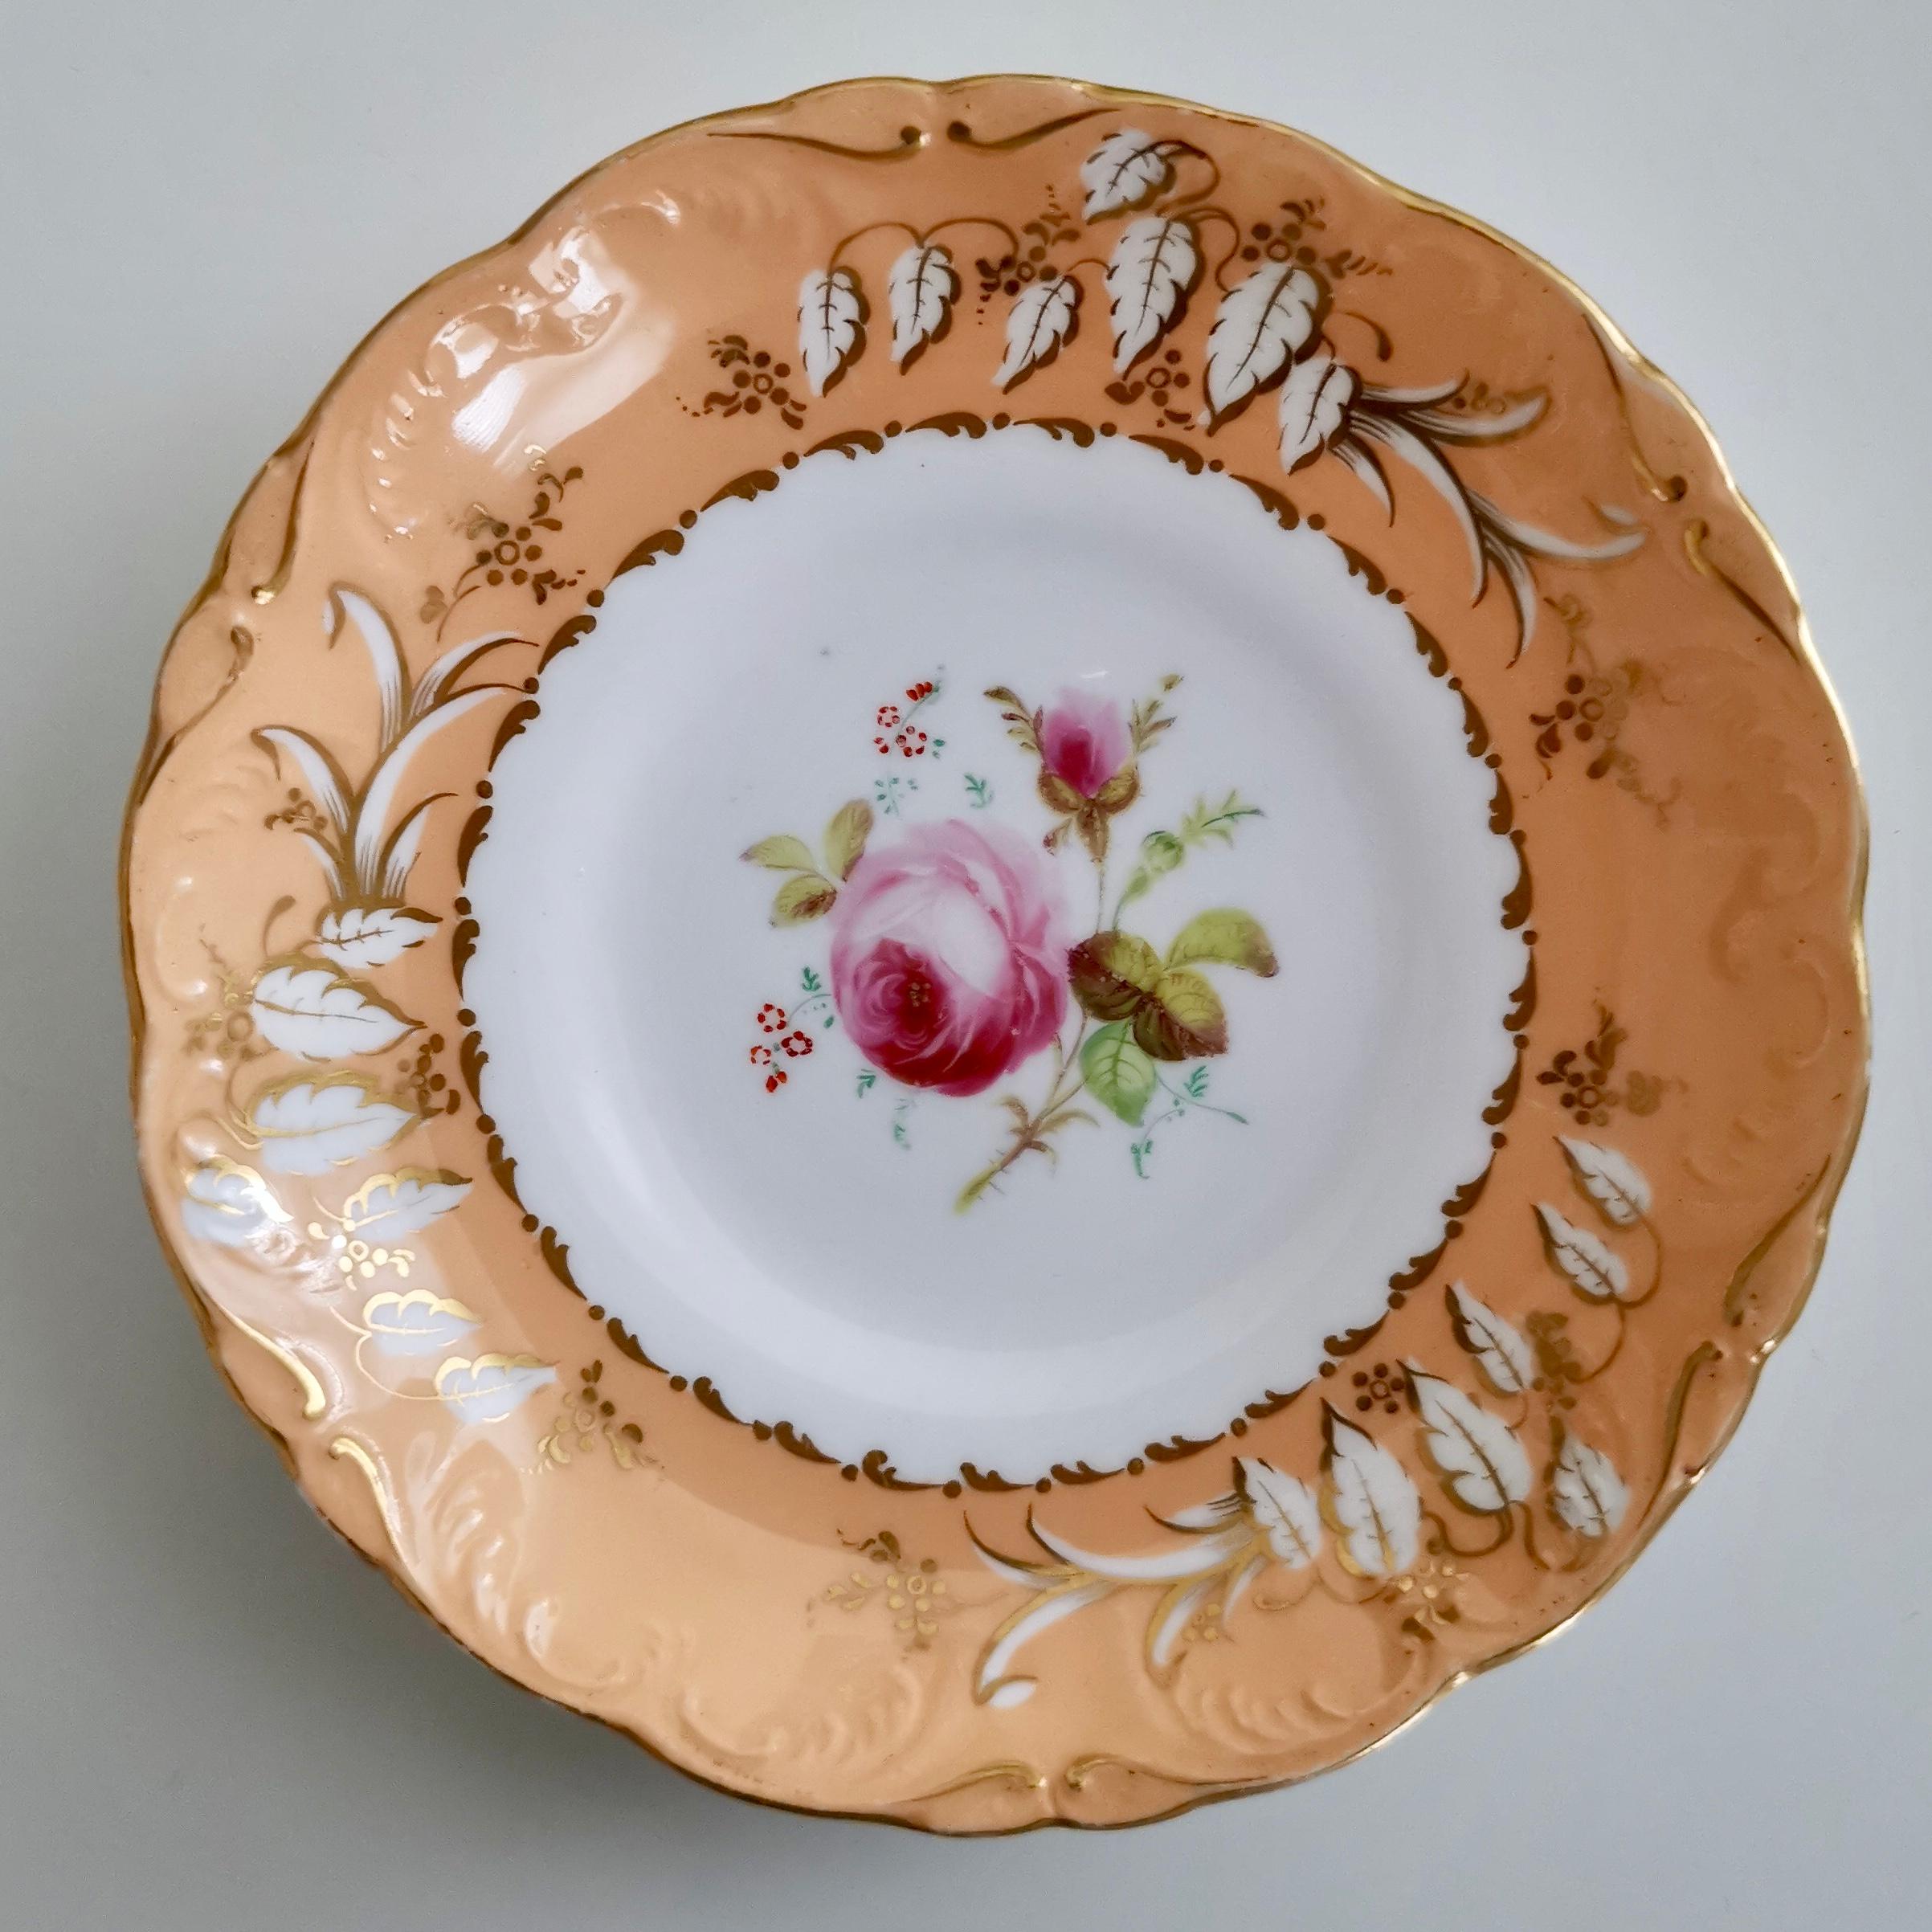 Rococo Revival Coalport Teacup, Adelaide Shape, Peach-Colored with Roses, circa 1839